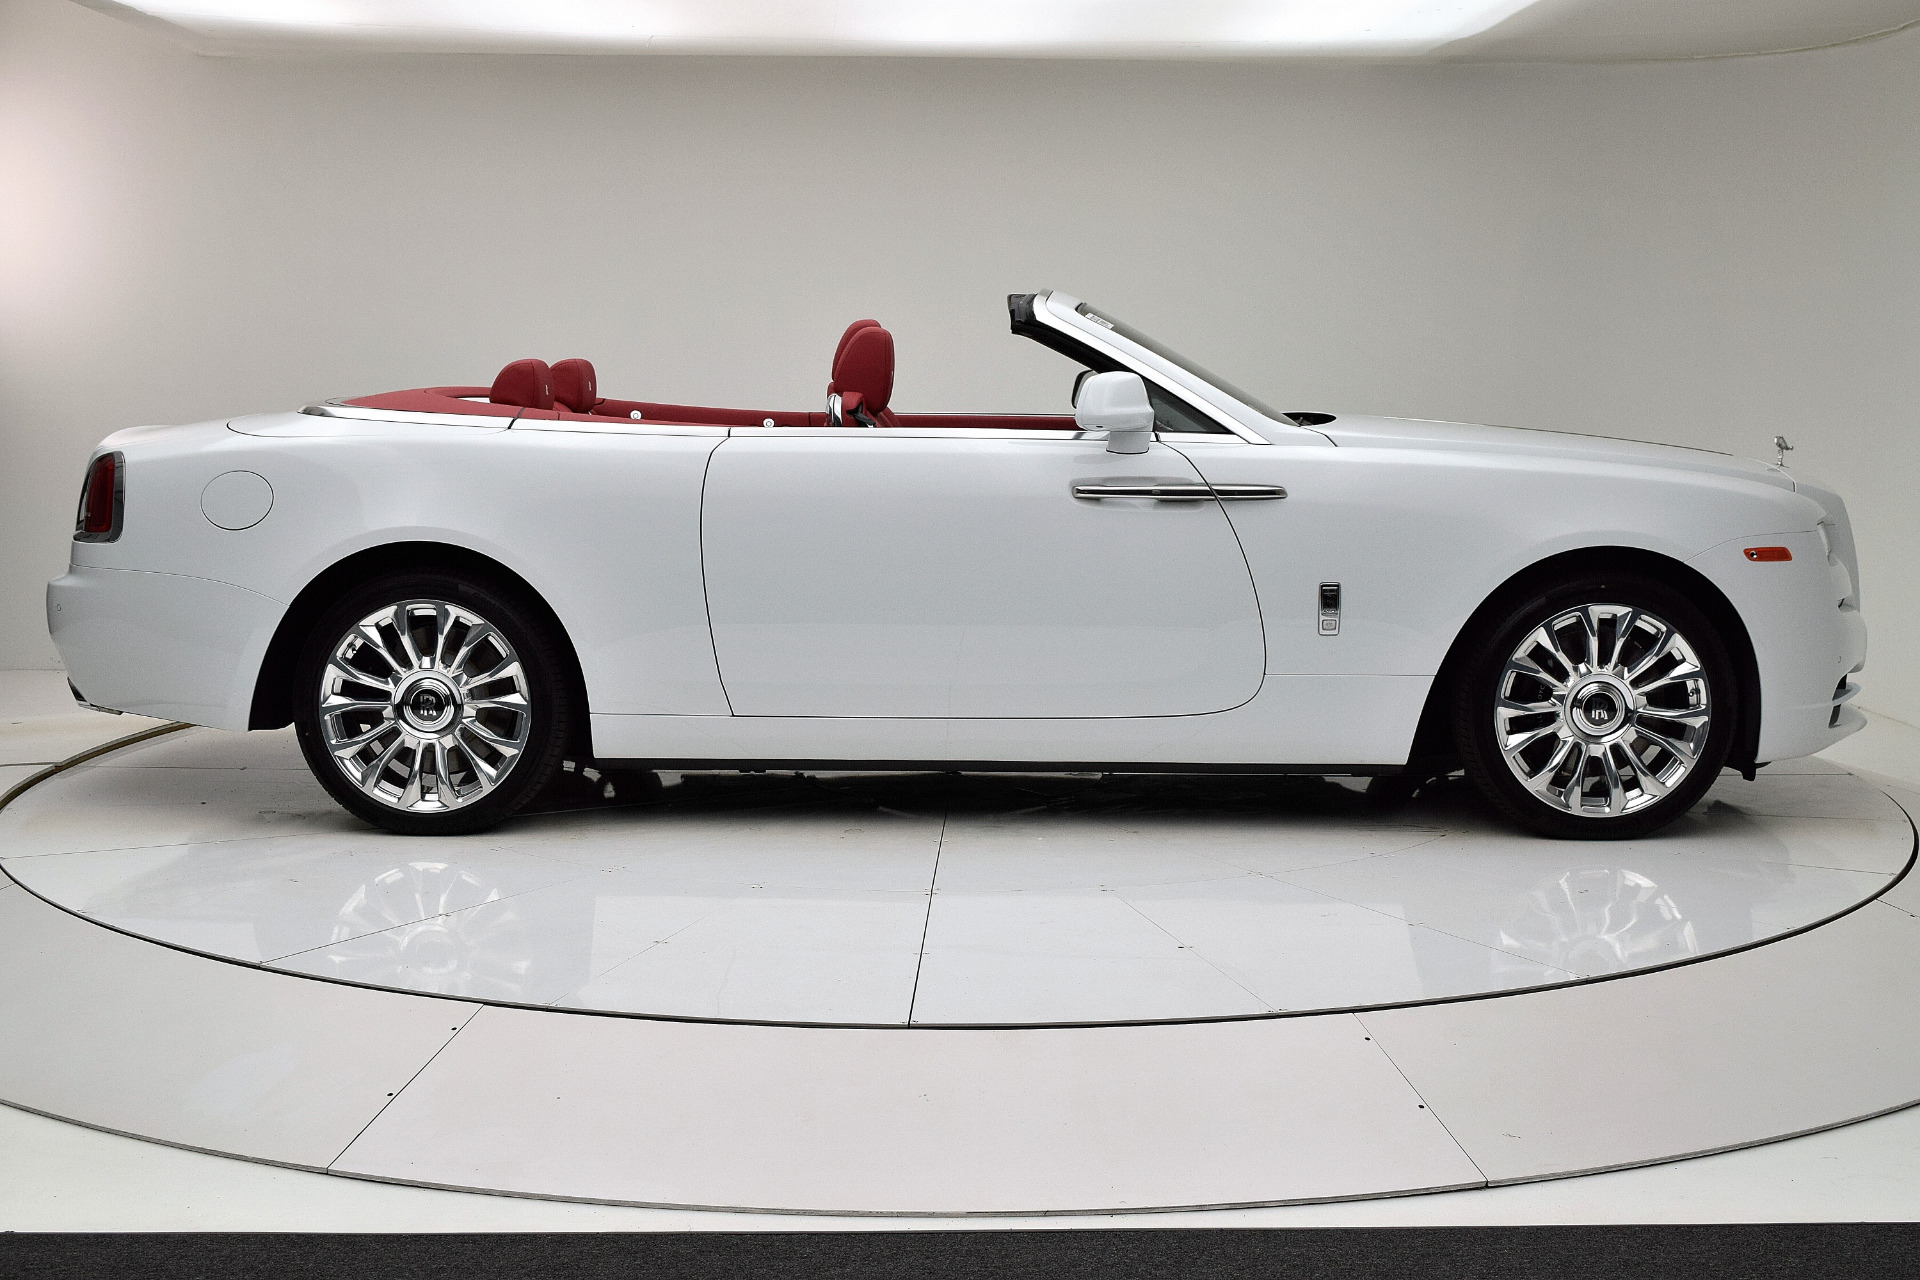 Used RollsRoyce Convertibles for Sale with Photos  CARFAX